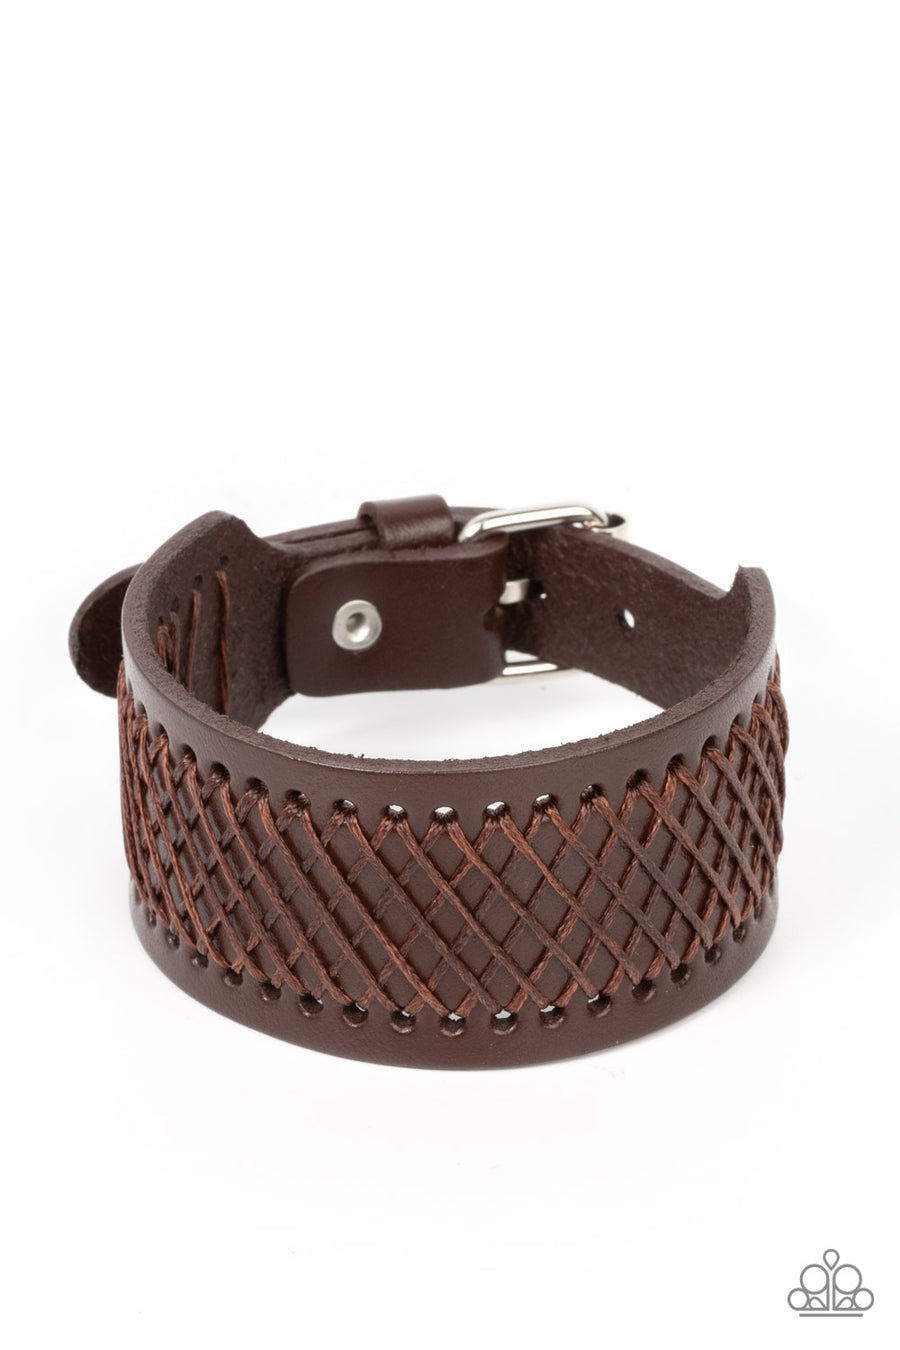 Drifter Discovery  - Brown Urban Leather Bracelet - Paparazzi Accessories - Shiny brown cording boldly crisscrosses across the front of a thick brown leather band, creating an edgy centerpiece around the wrist. Features a buckle closure.